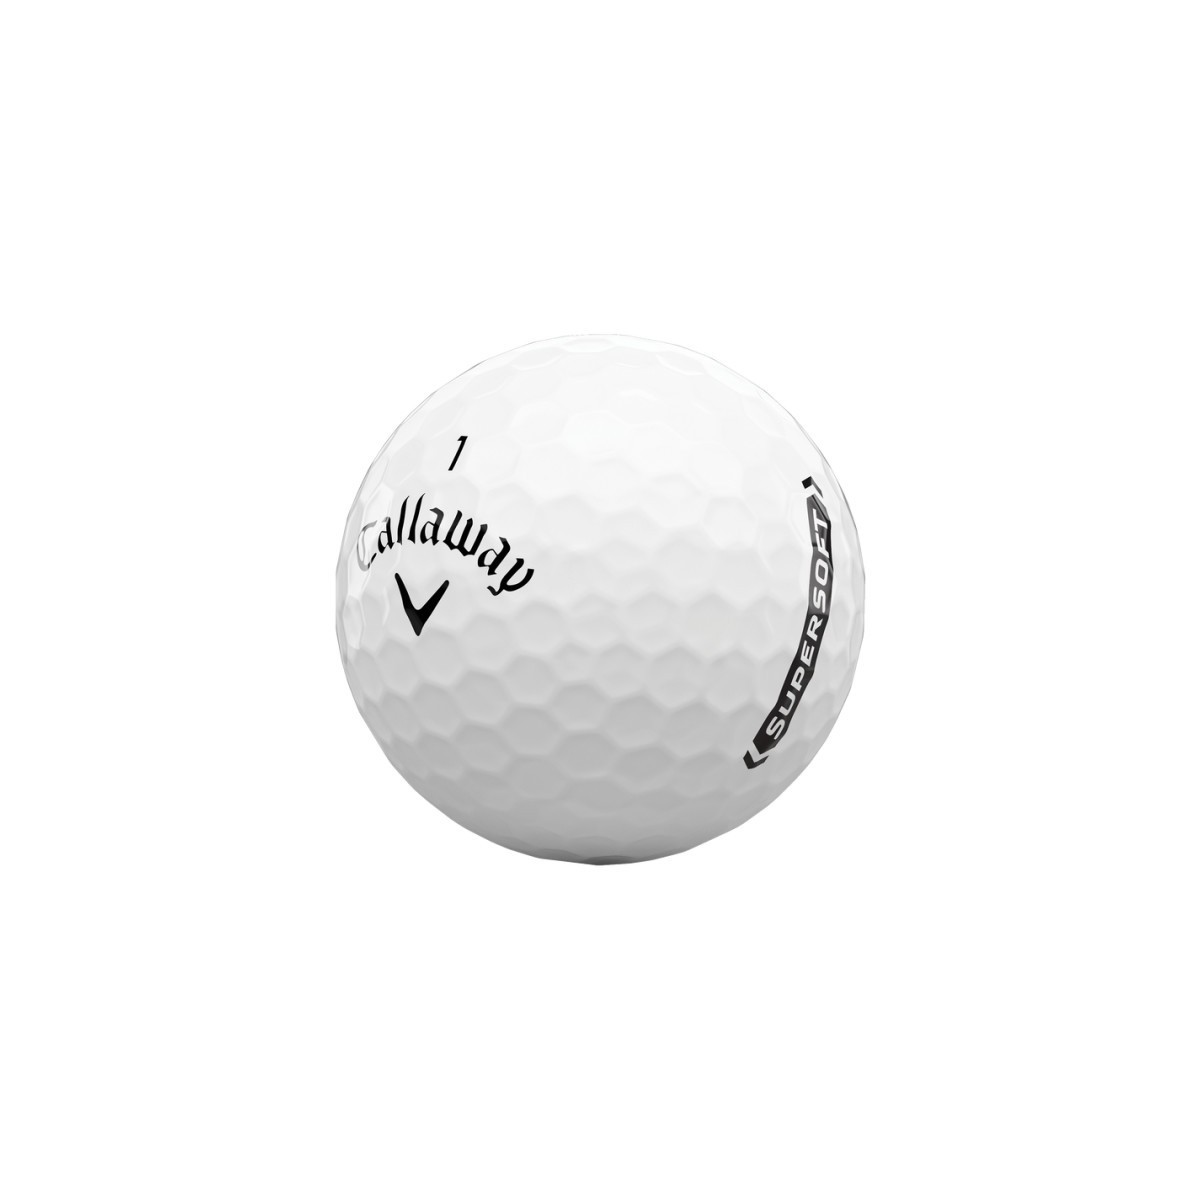 CALLAWAY SUPERSOFT BLANCHE